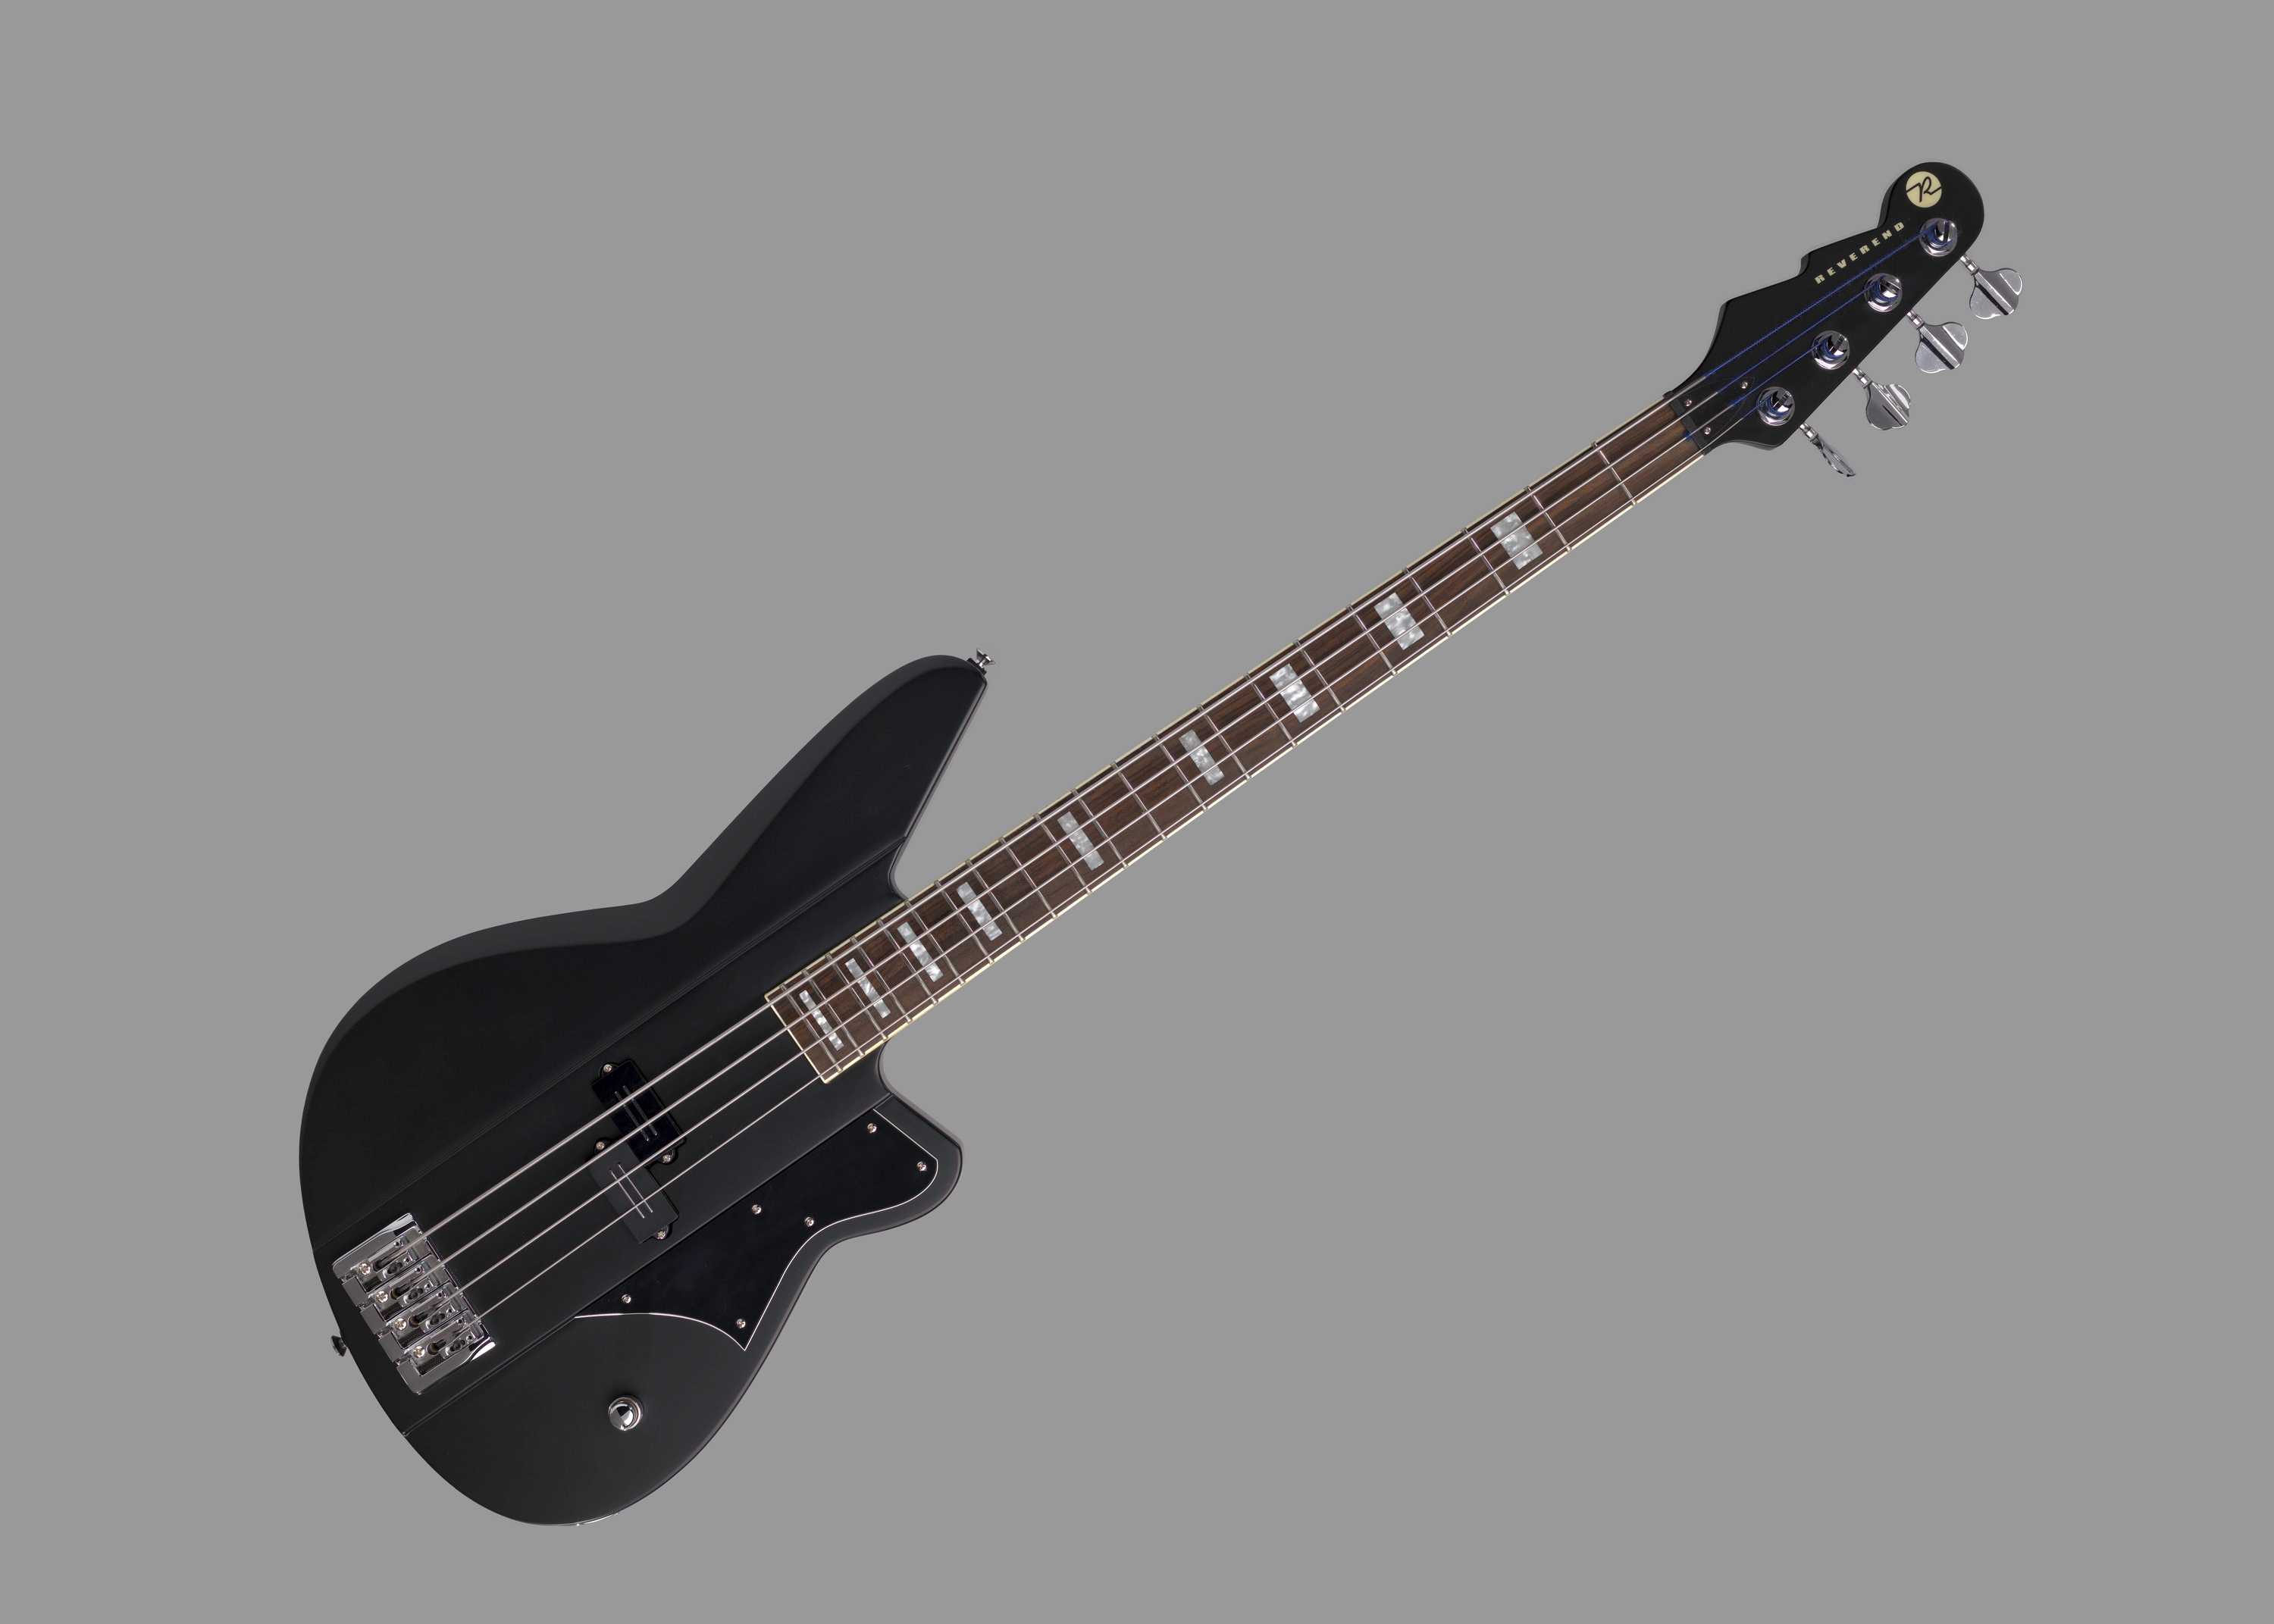 Meshell Ndegeocello's Bass's is black. It is suspended in front of a grey background.